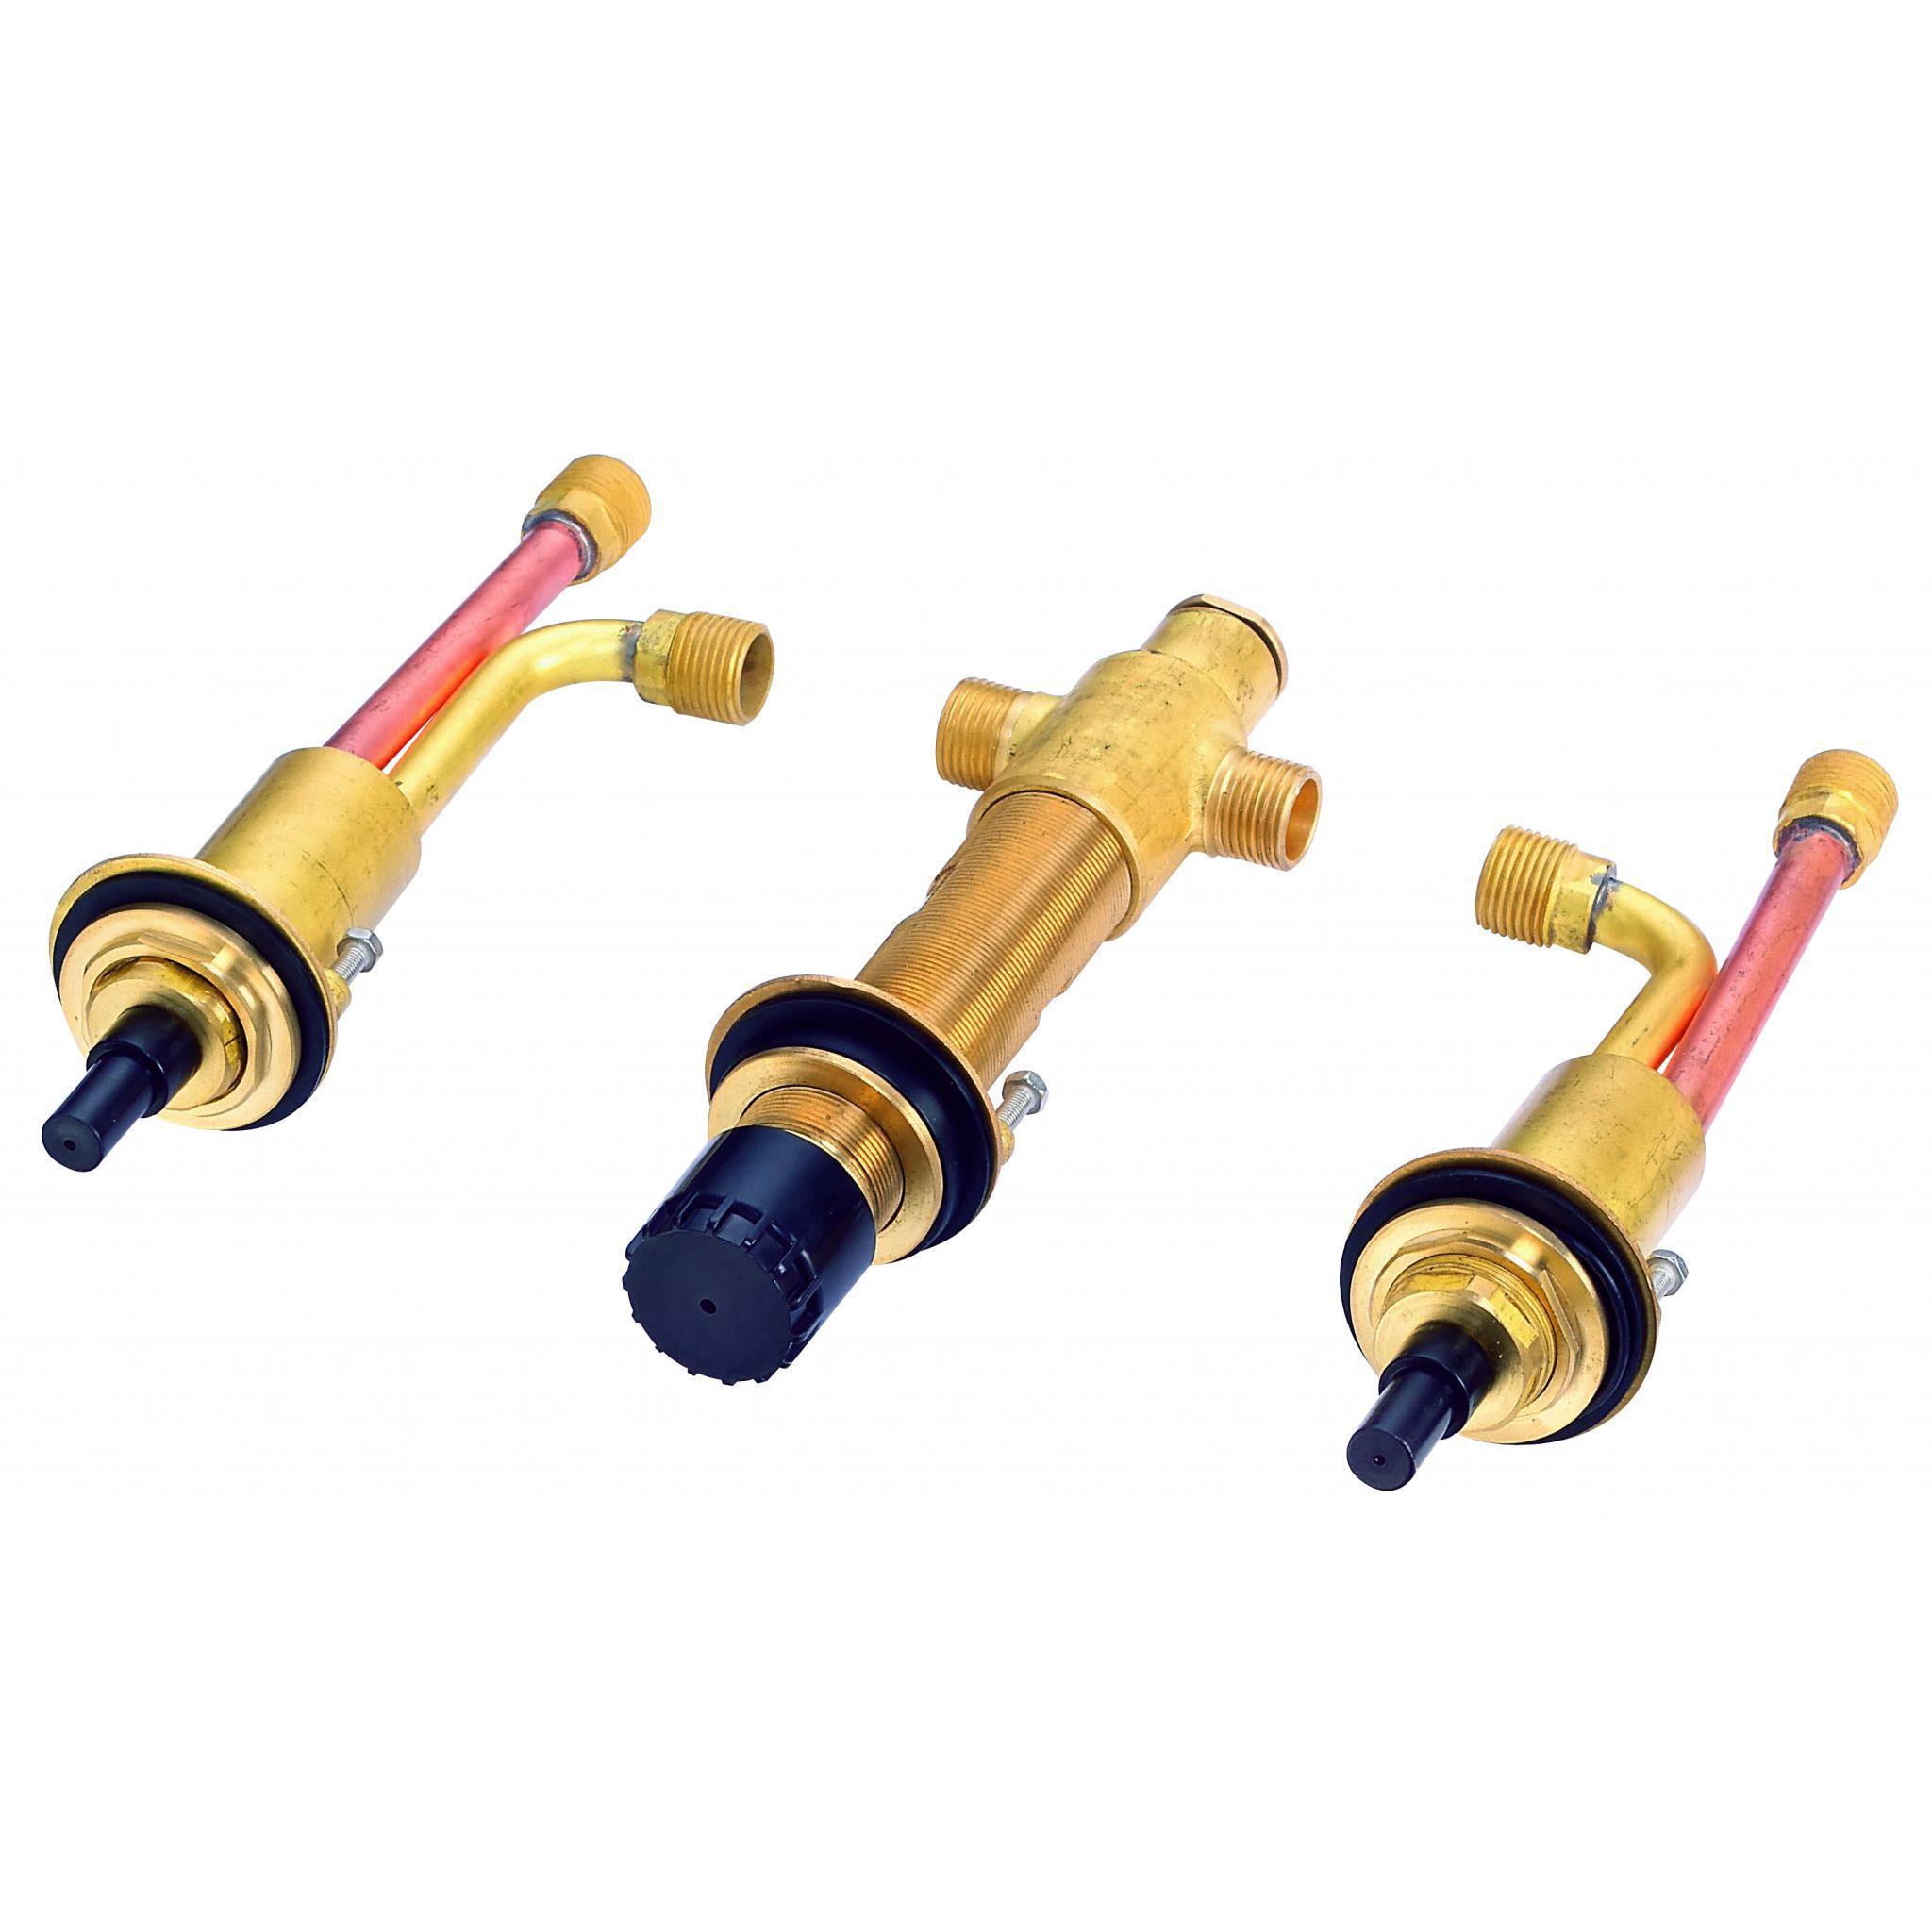 Danze D215000BT Widespread Rough-In Valve & Spout Tube for Roman Tub Filler up to 3" Deck Thickness - Rough Brass